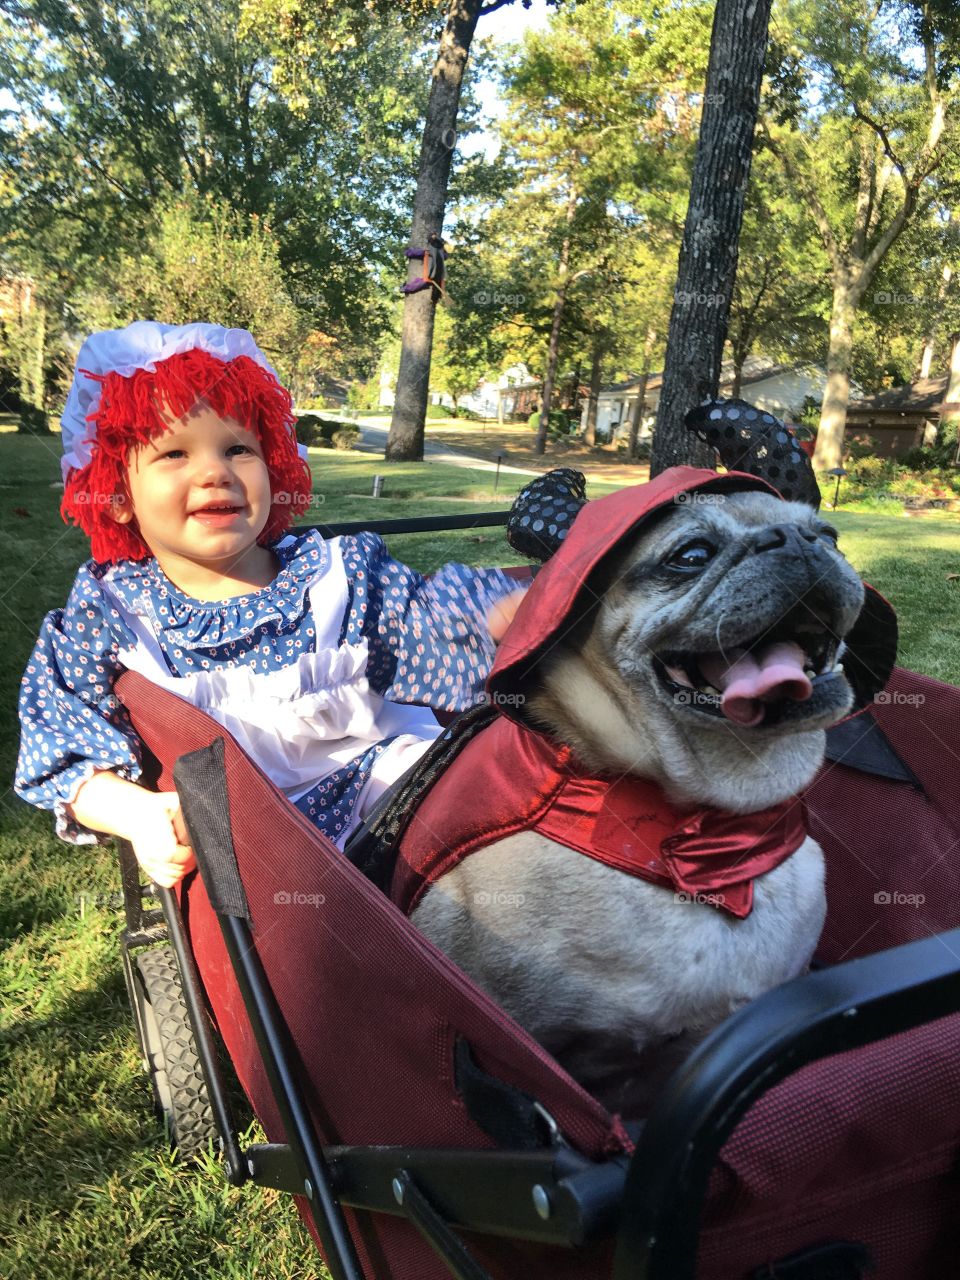 Raggedy Ann and her little devil dog